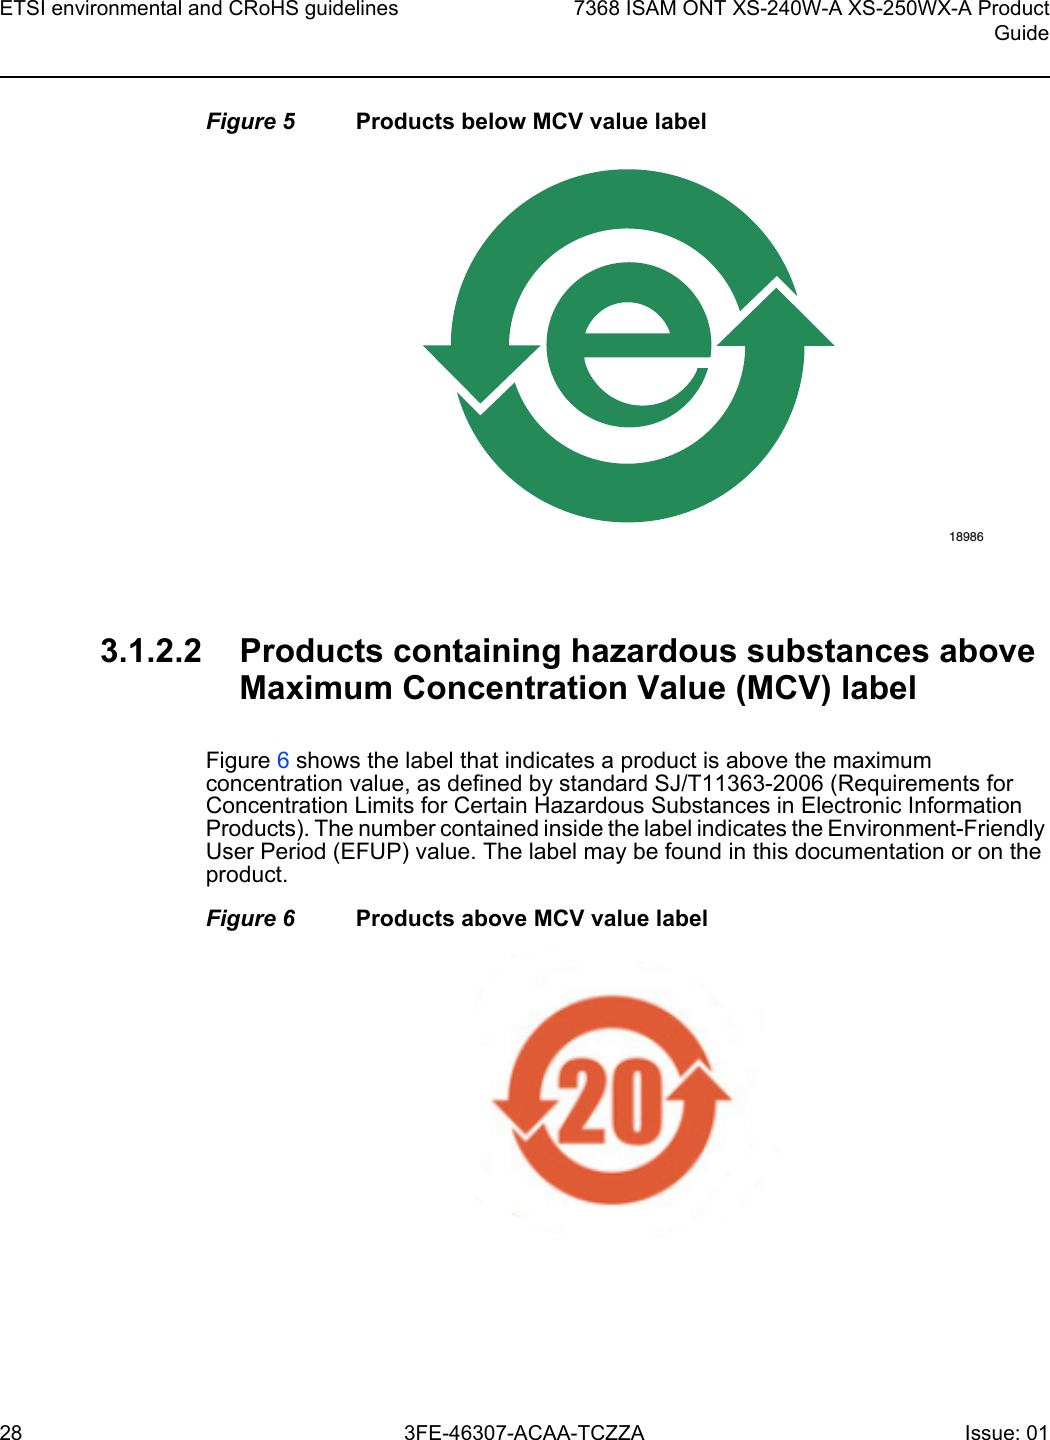 ETSI environmental and CRoHS guidelines287368 ISAM ONT XS-240W-A XS-250WX-A ProductGuide3FE-46307-ACAA-TCZZA Issue: 01 Figure 5 Products below MCV value label3.1.2.2 Products containing hazardous substances above Maximum Concentration Value (MCV) labelFigure 6 shows the label that indicates a product is above the maximum concentration value, as defined by standard SJ/T11363-2006 (Requirements for Concentration Limits for Certain Hazardous Substances in Electronic Information Products). The number contained inside the label indicates the Environment-Friendly User Period (EFUP) value. The label may be found in this documentation or on the product.Figure 6 Products above MCV value label18986